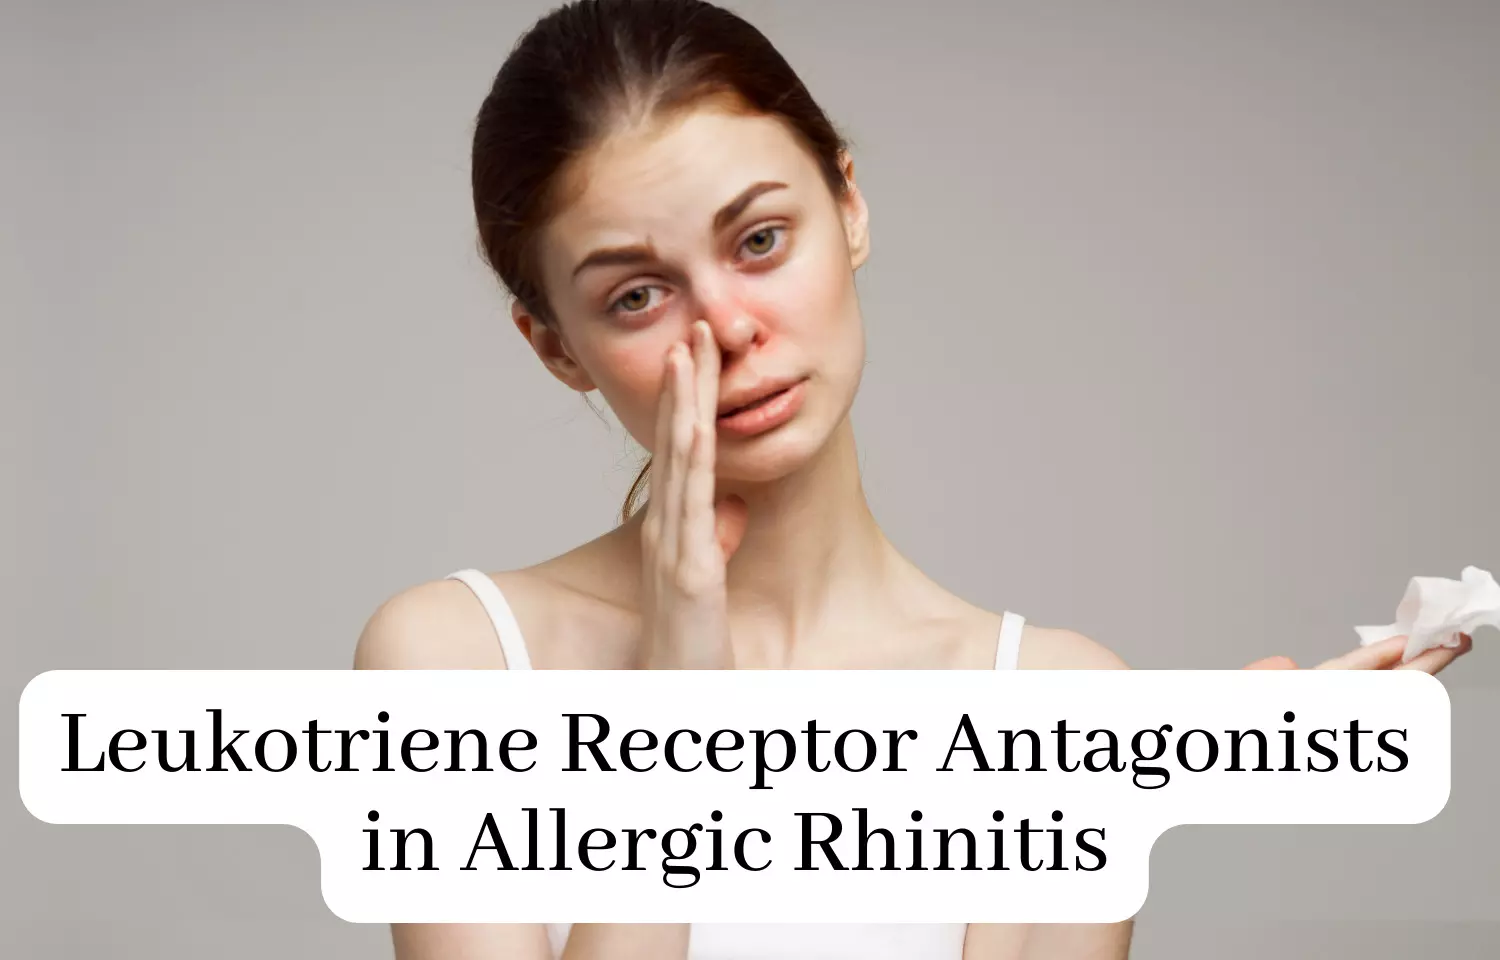 Analyzing the efficacy and safety of leukotriene receptor antagonists in the management of allergic rhinitis